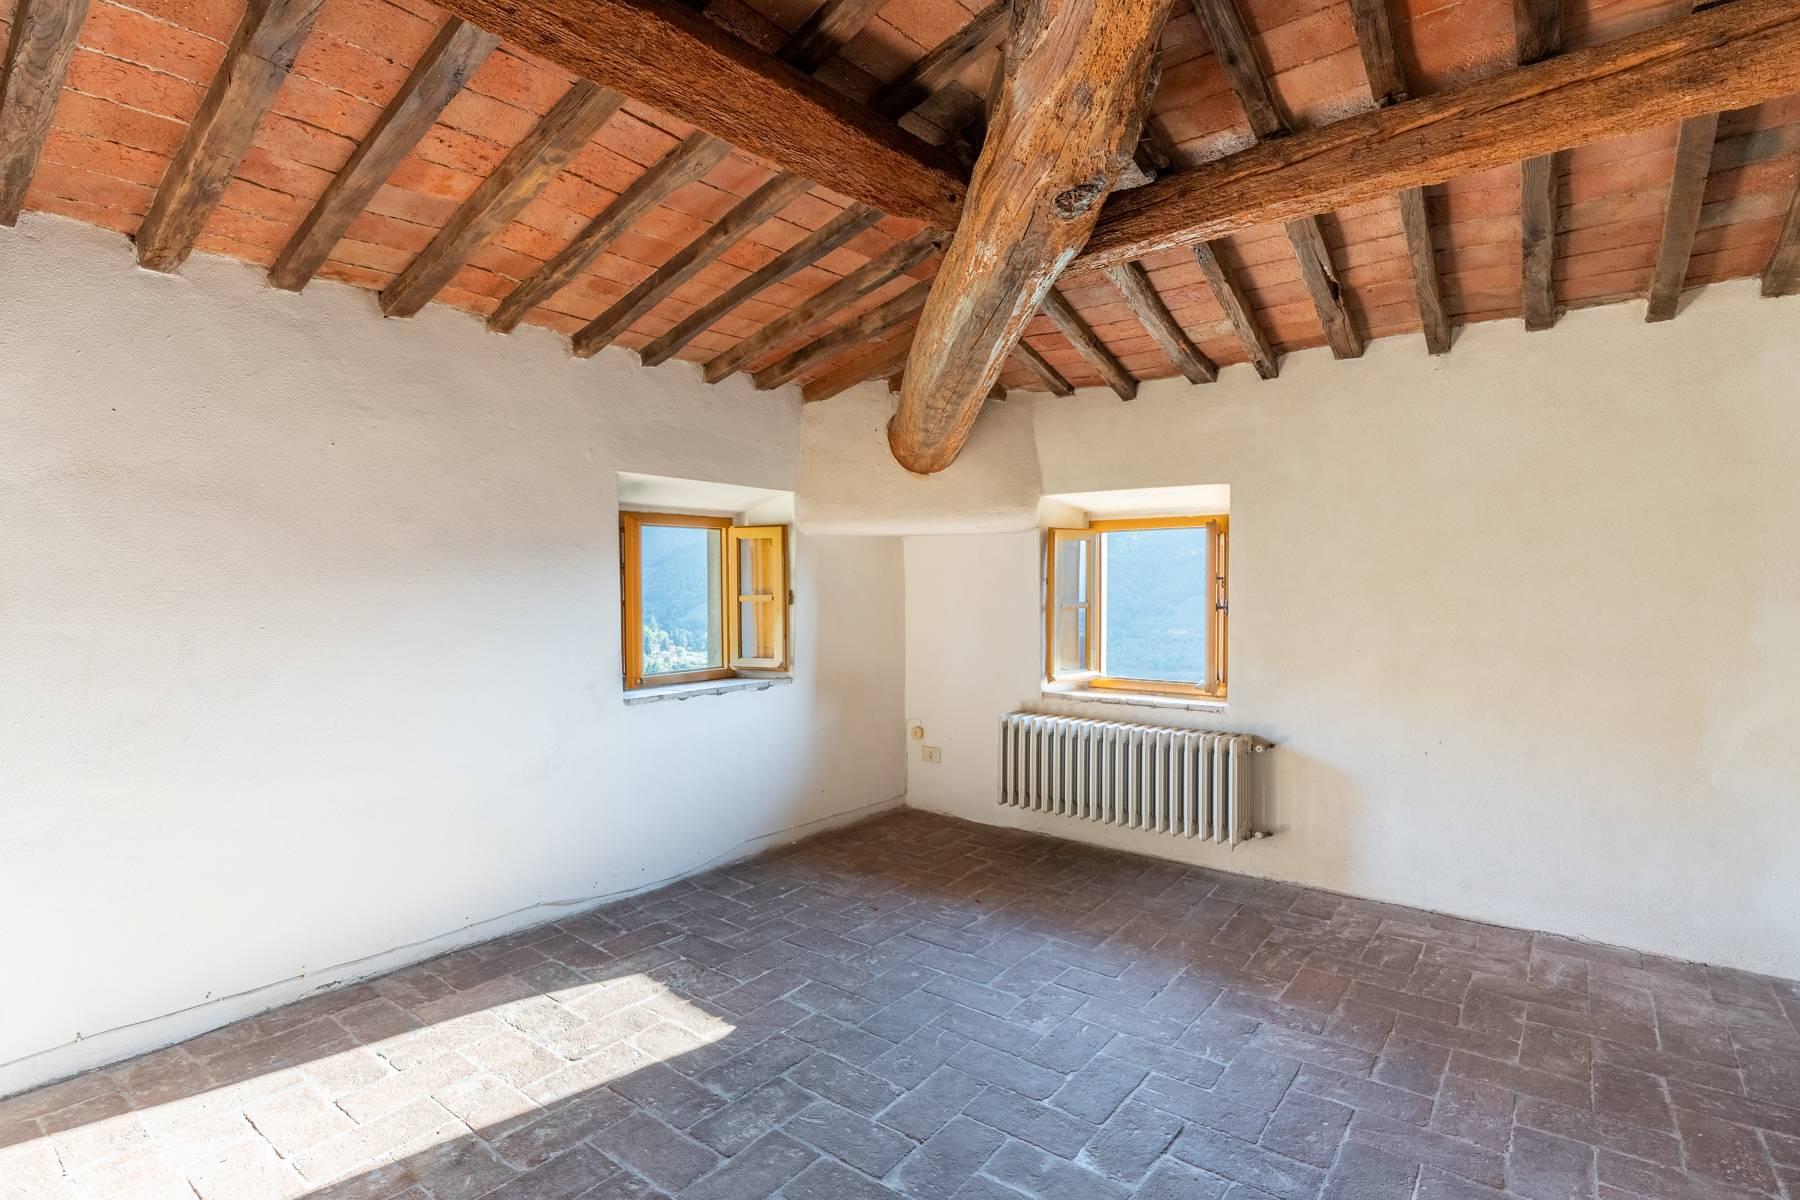 Superb villa with breathtaking views of the Lucca countryside - 24